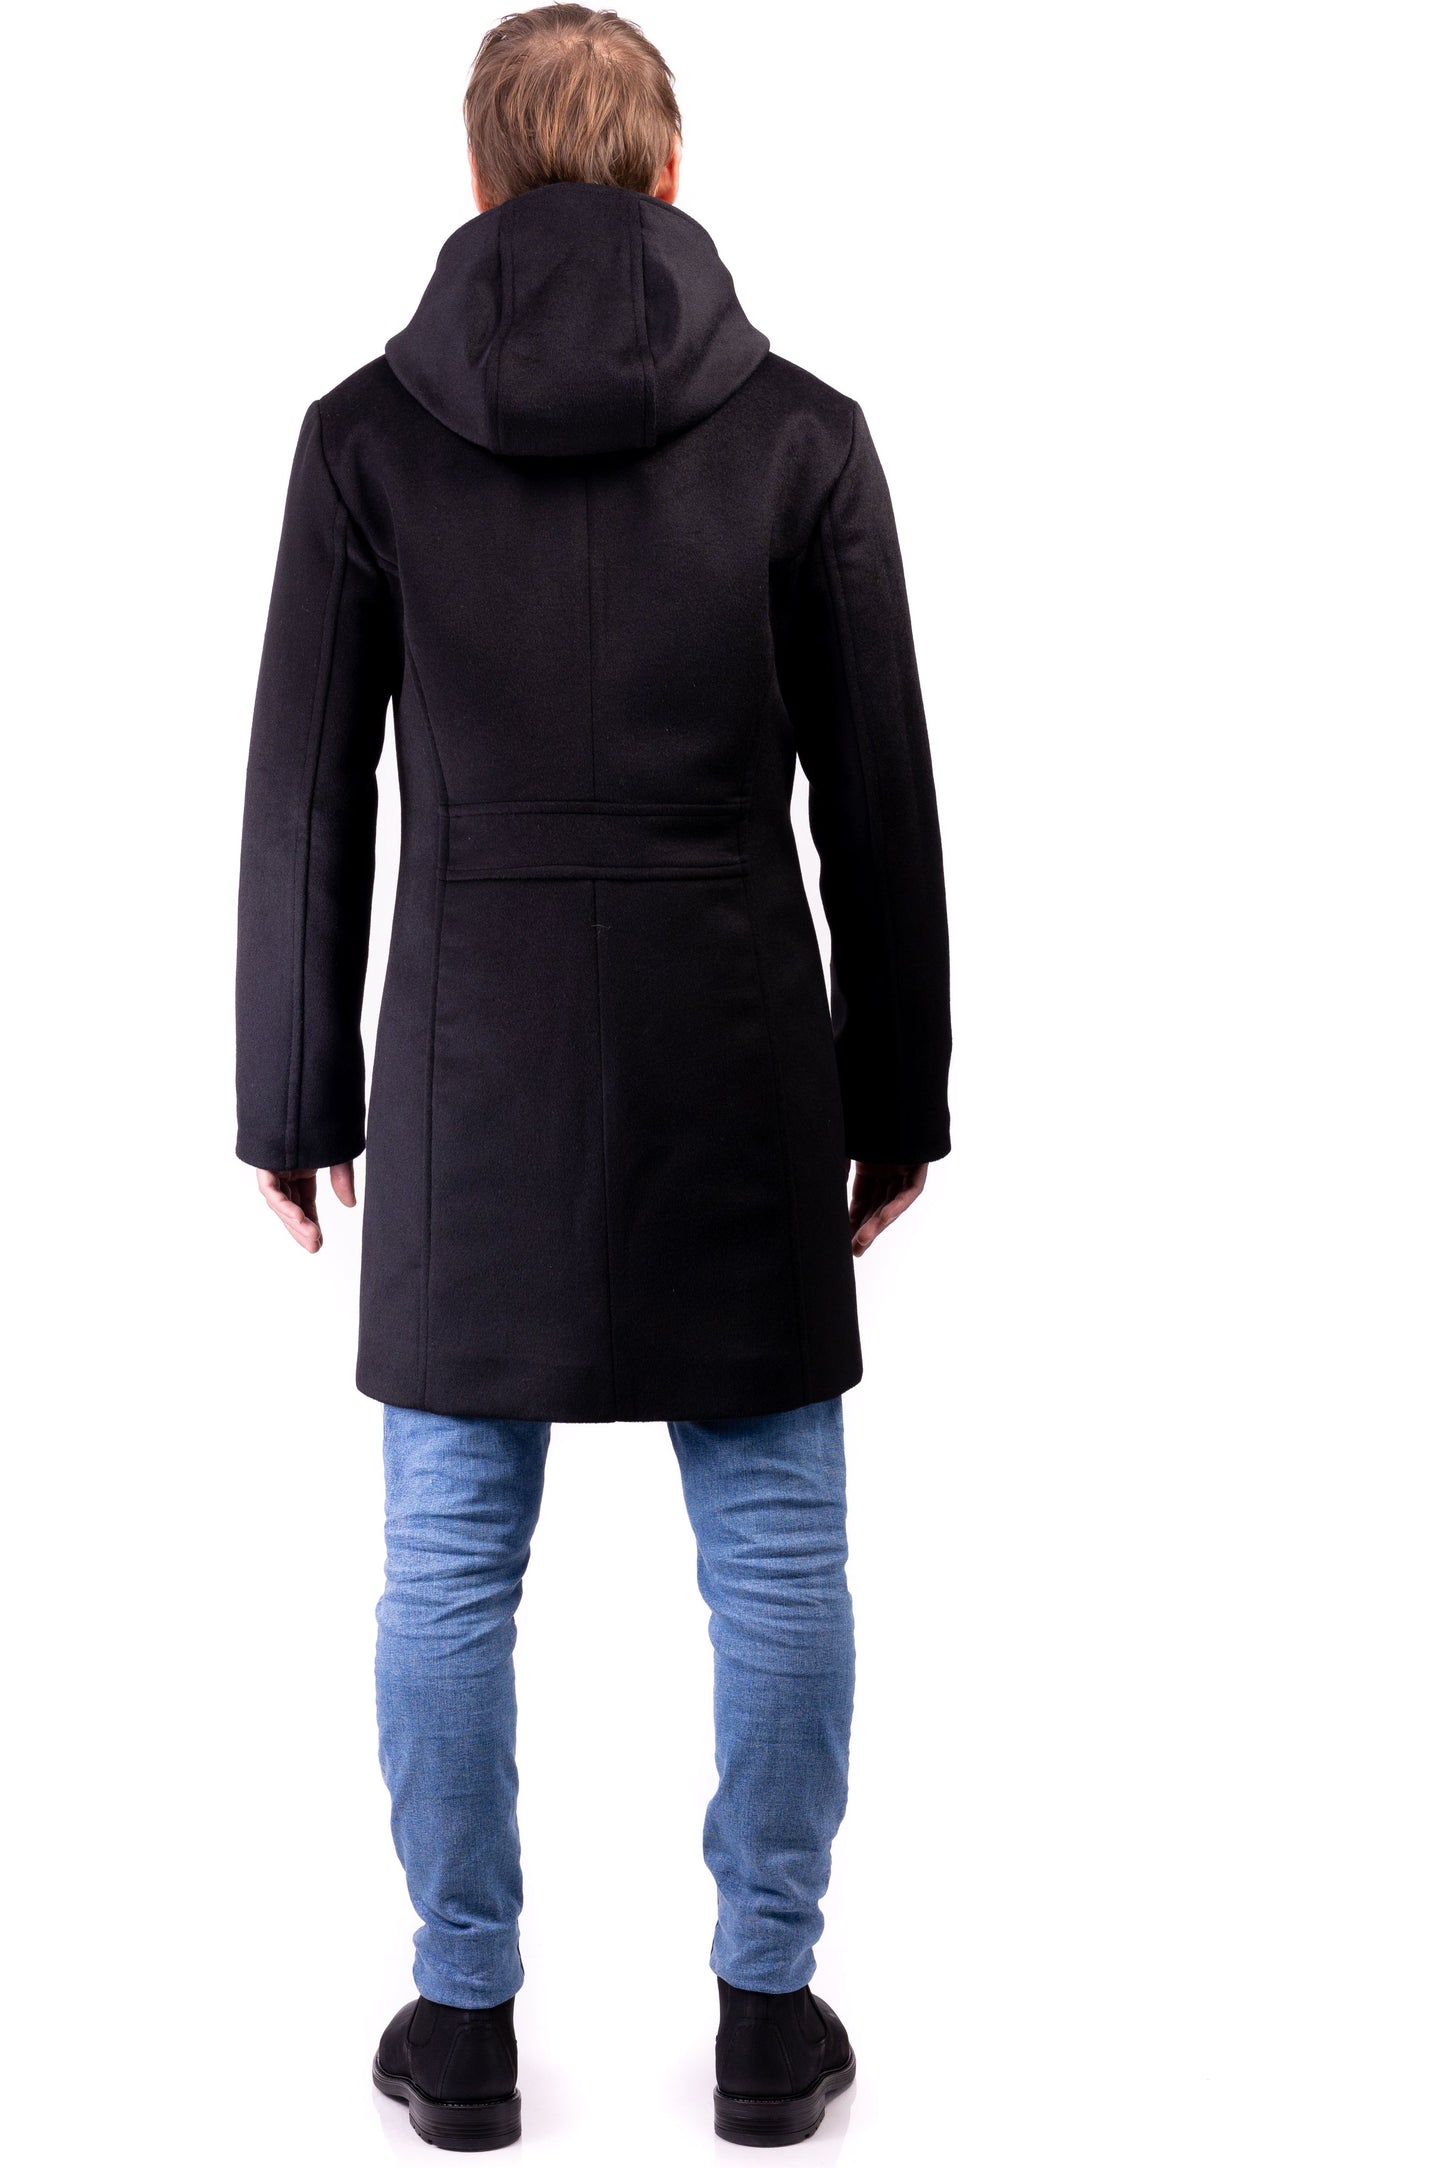 Desloups men's asymmetrical winter coat with detachable hood in 100% wool and lined